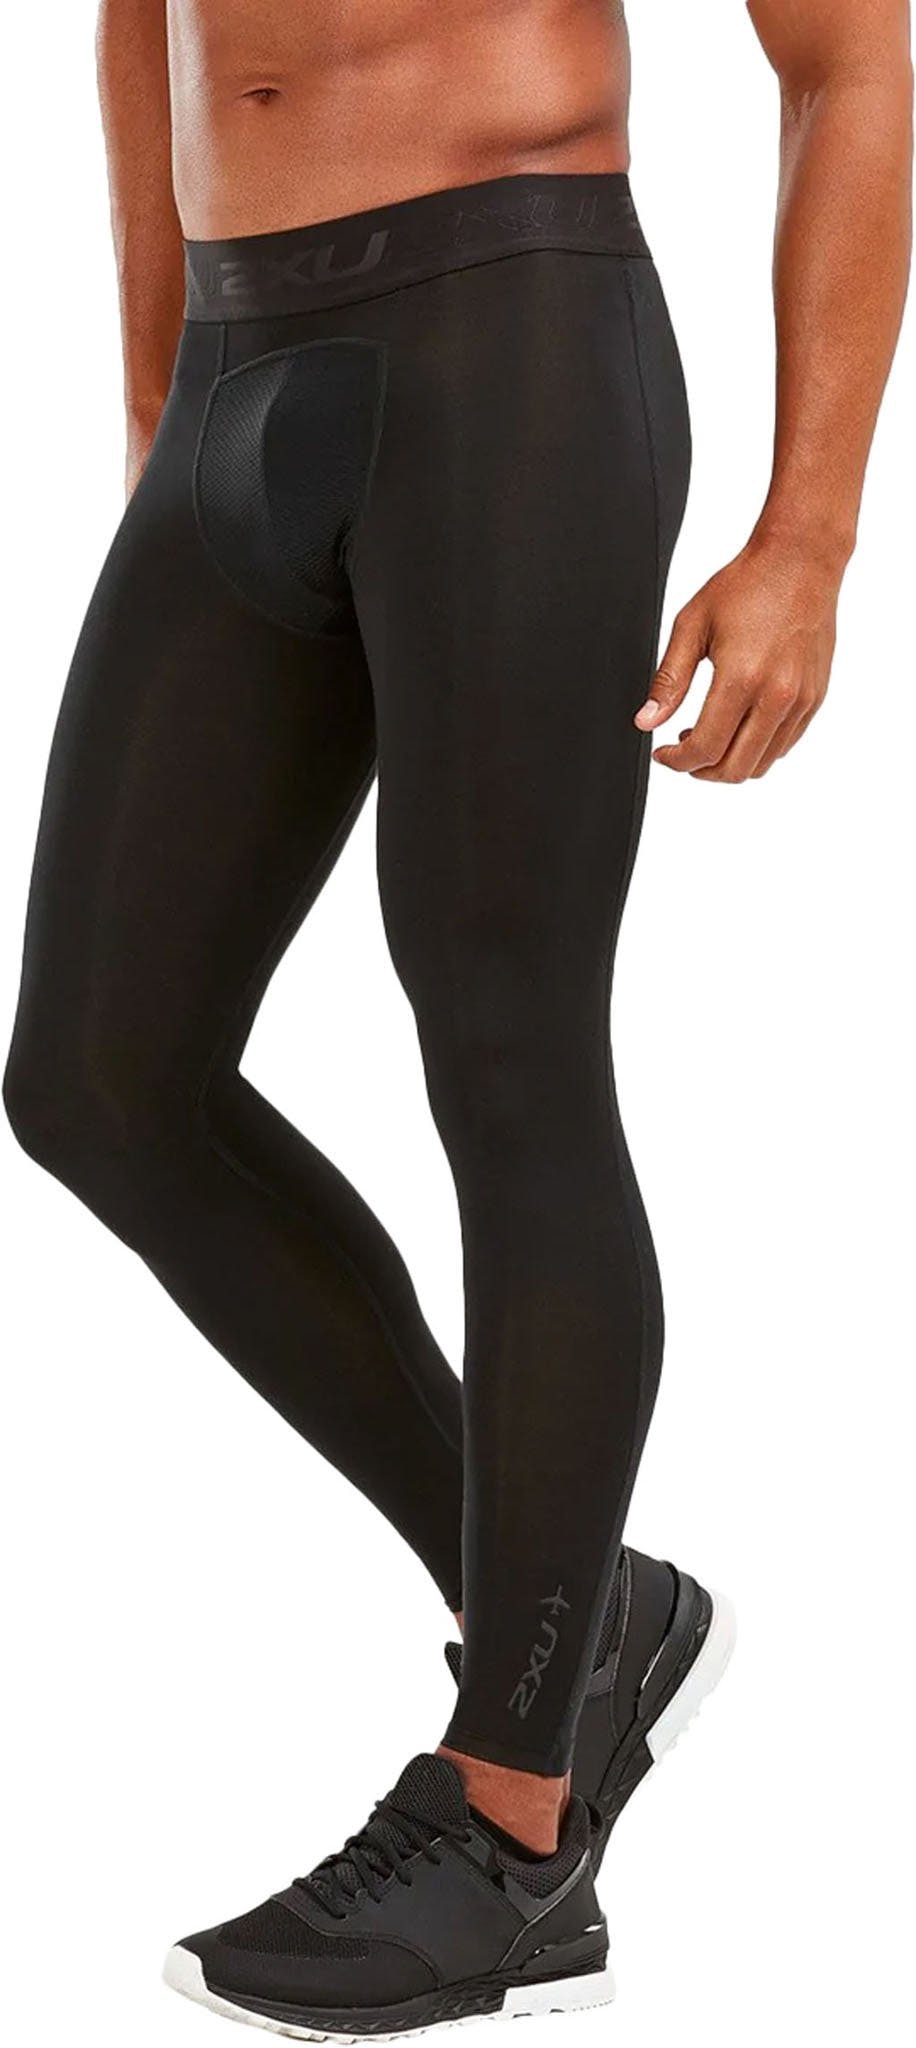 Product image for Flight Compression Tights - Men's